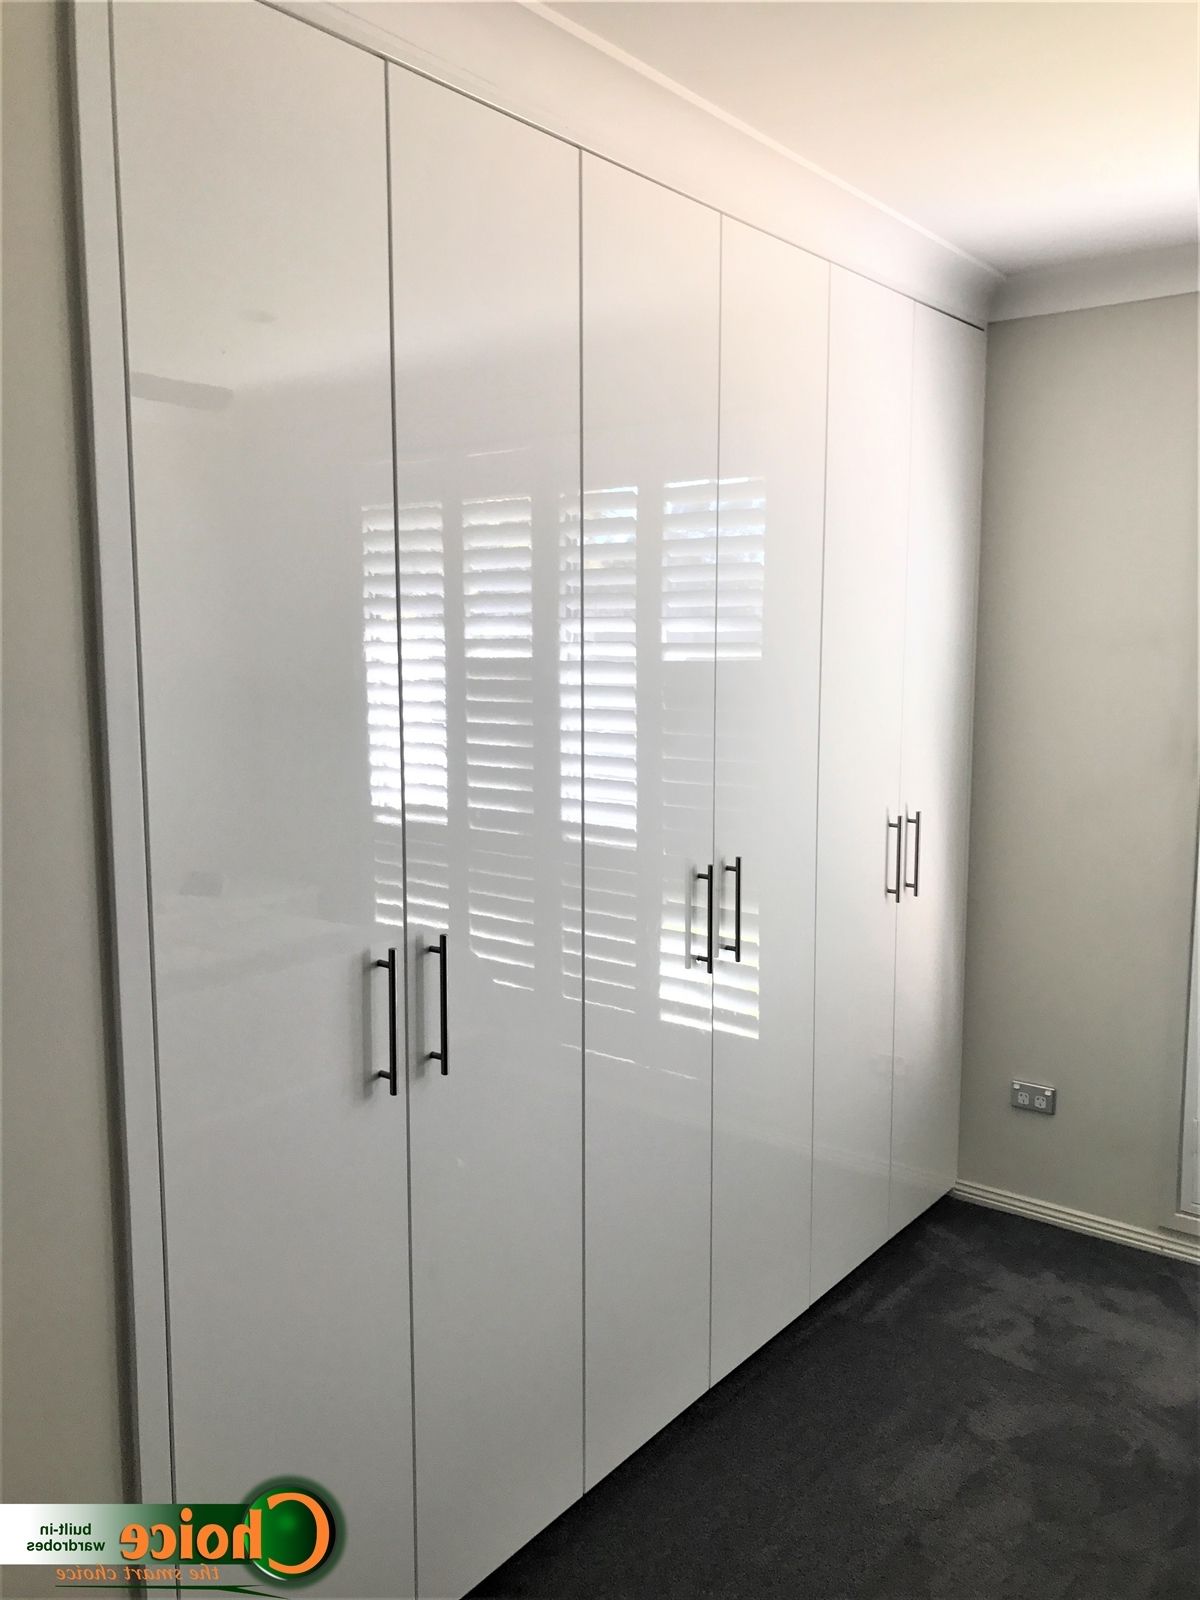 High Gloss White Pollurathane Sliding Doors  Choice Wardrobes | Built In  Wardrobes For Western Sydney  Choice Wardrobes Within White High Gloss Sliding Wardrobes (Gallery 12 of 17)